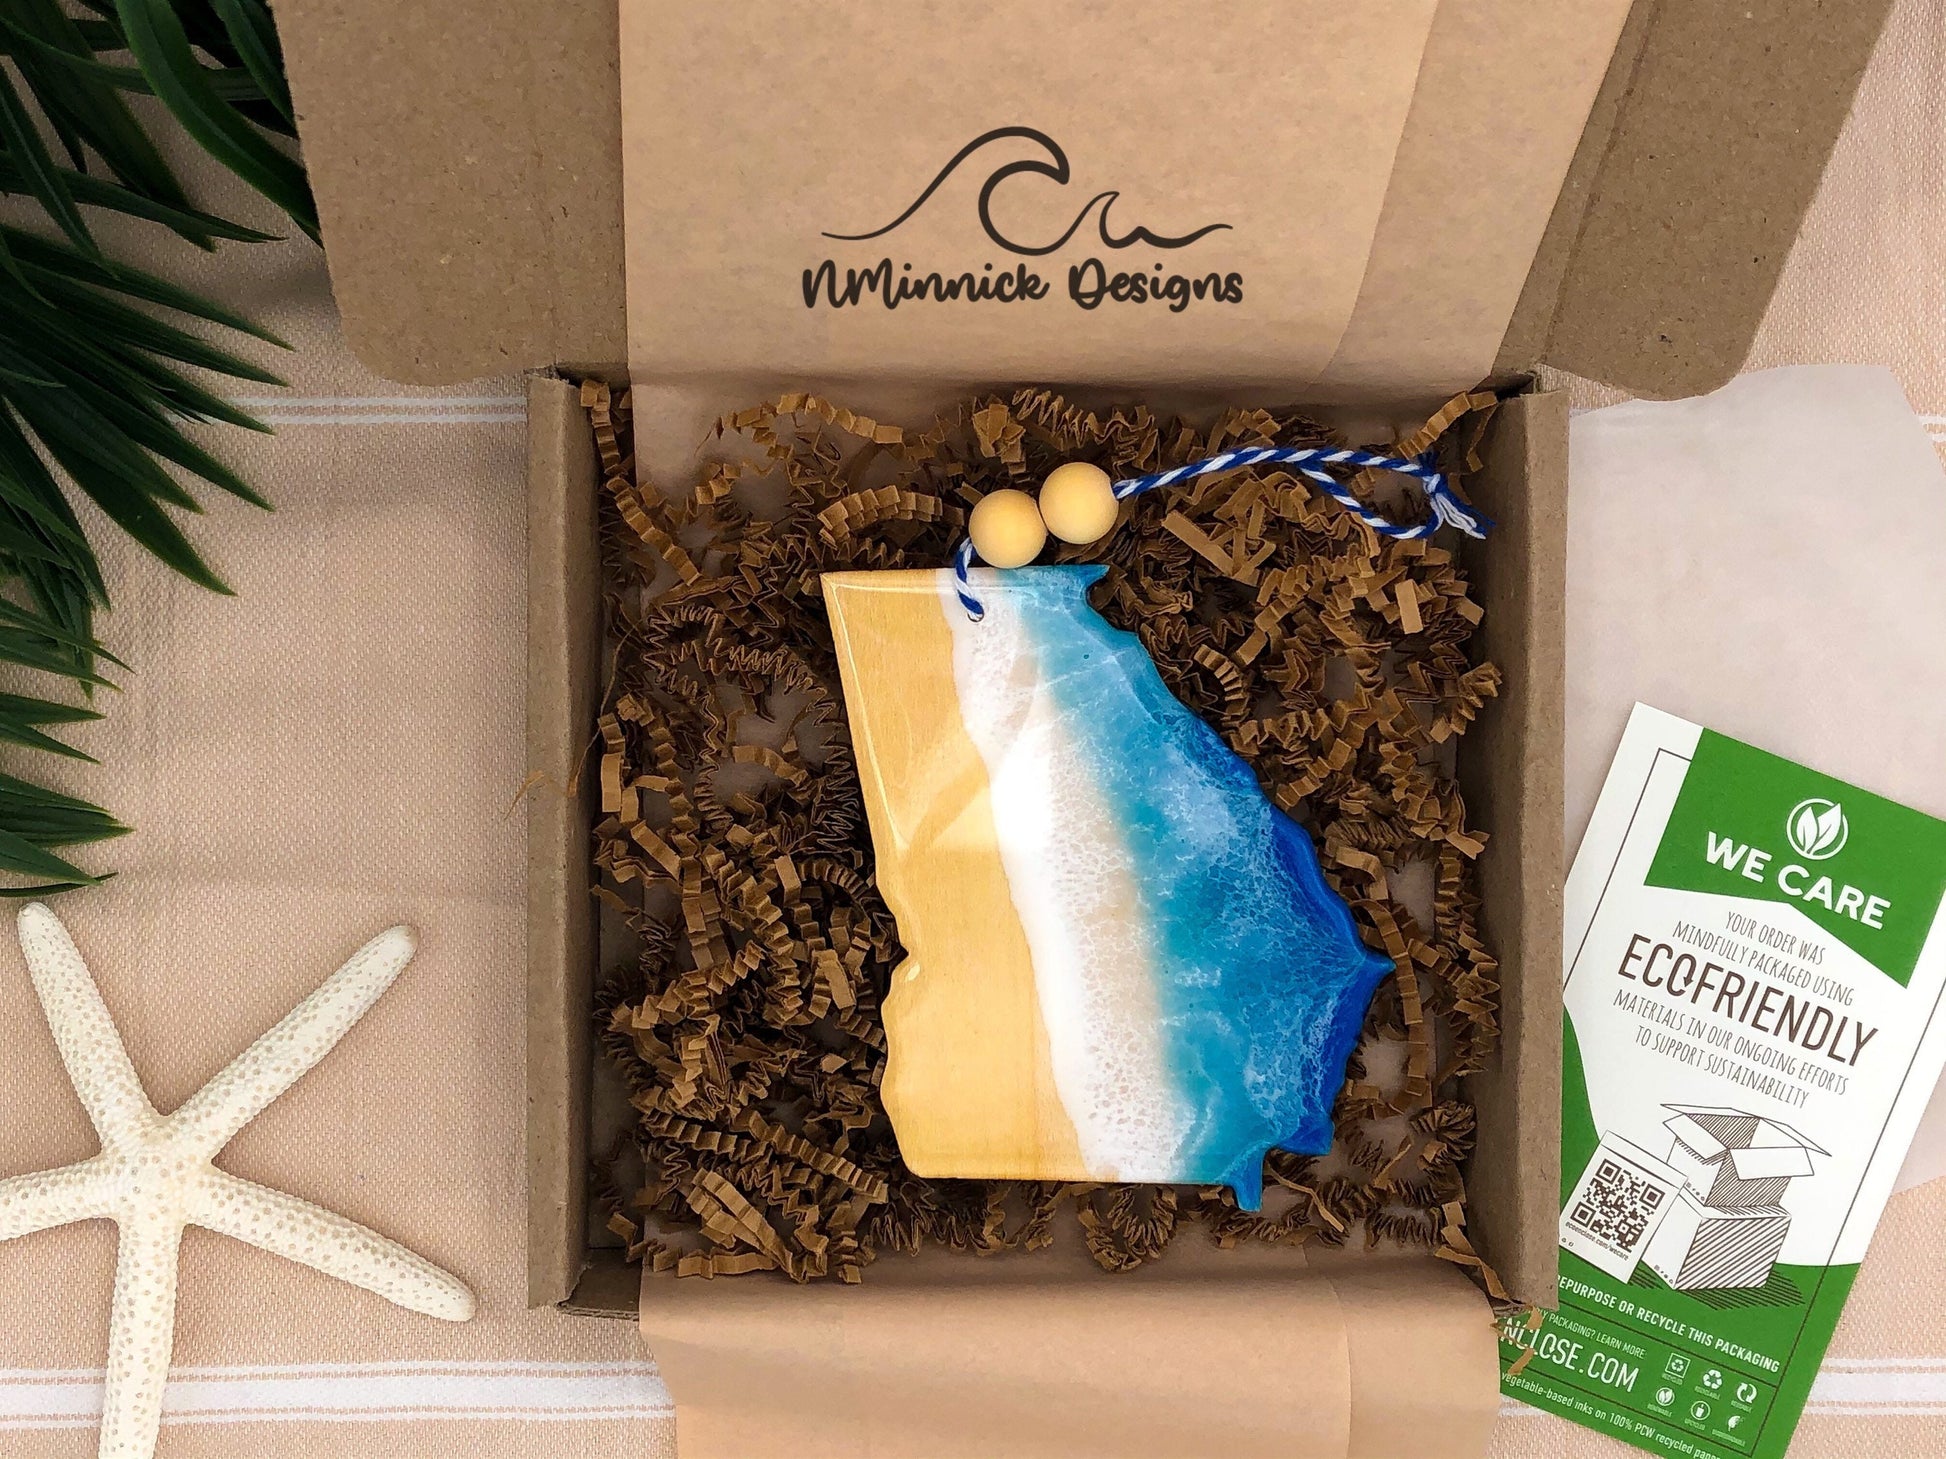 Georgia state beach ornament packaged in ecofriendly plastic free materials with recyclable box, tissue paper and paper shred.